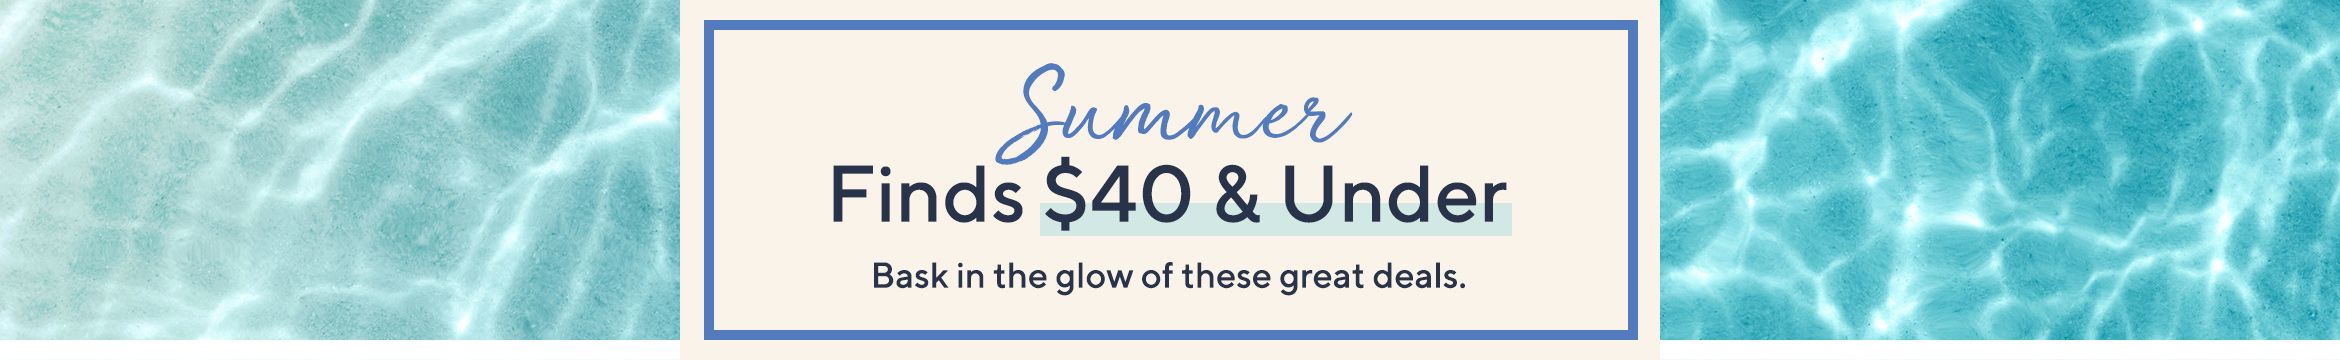 Summer Finds $40 & Under  Bask in the glow of these great deals.